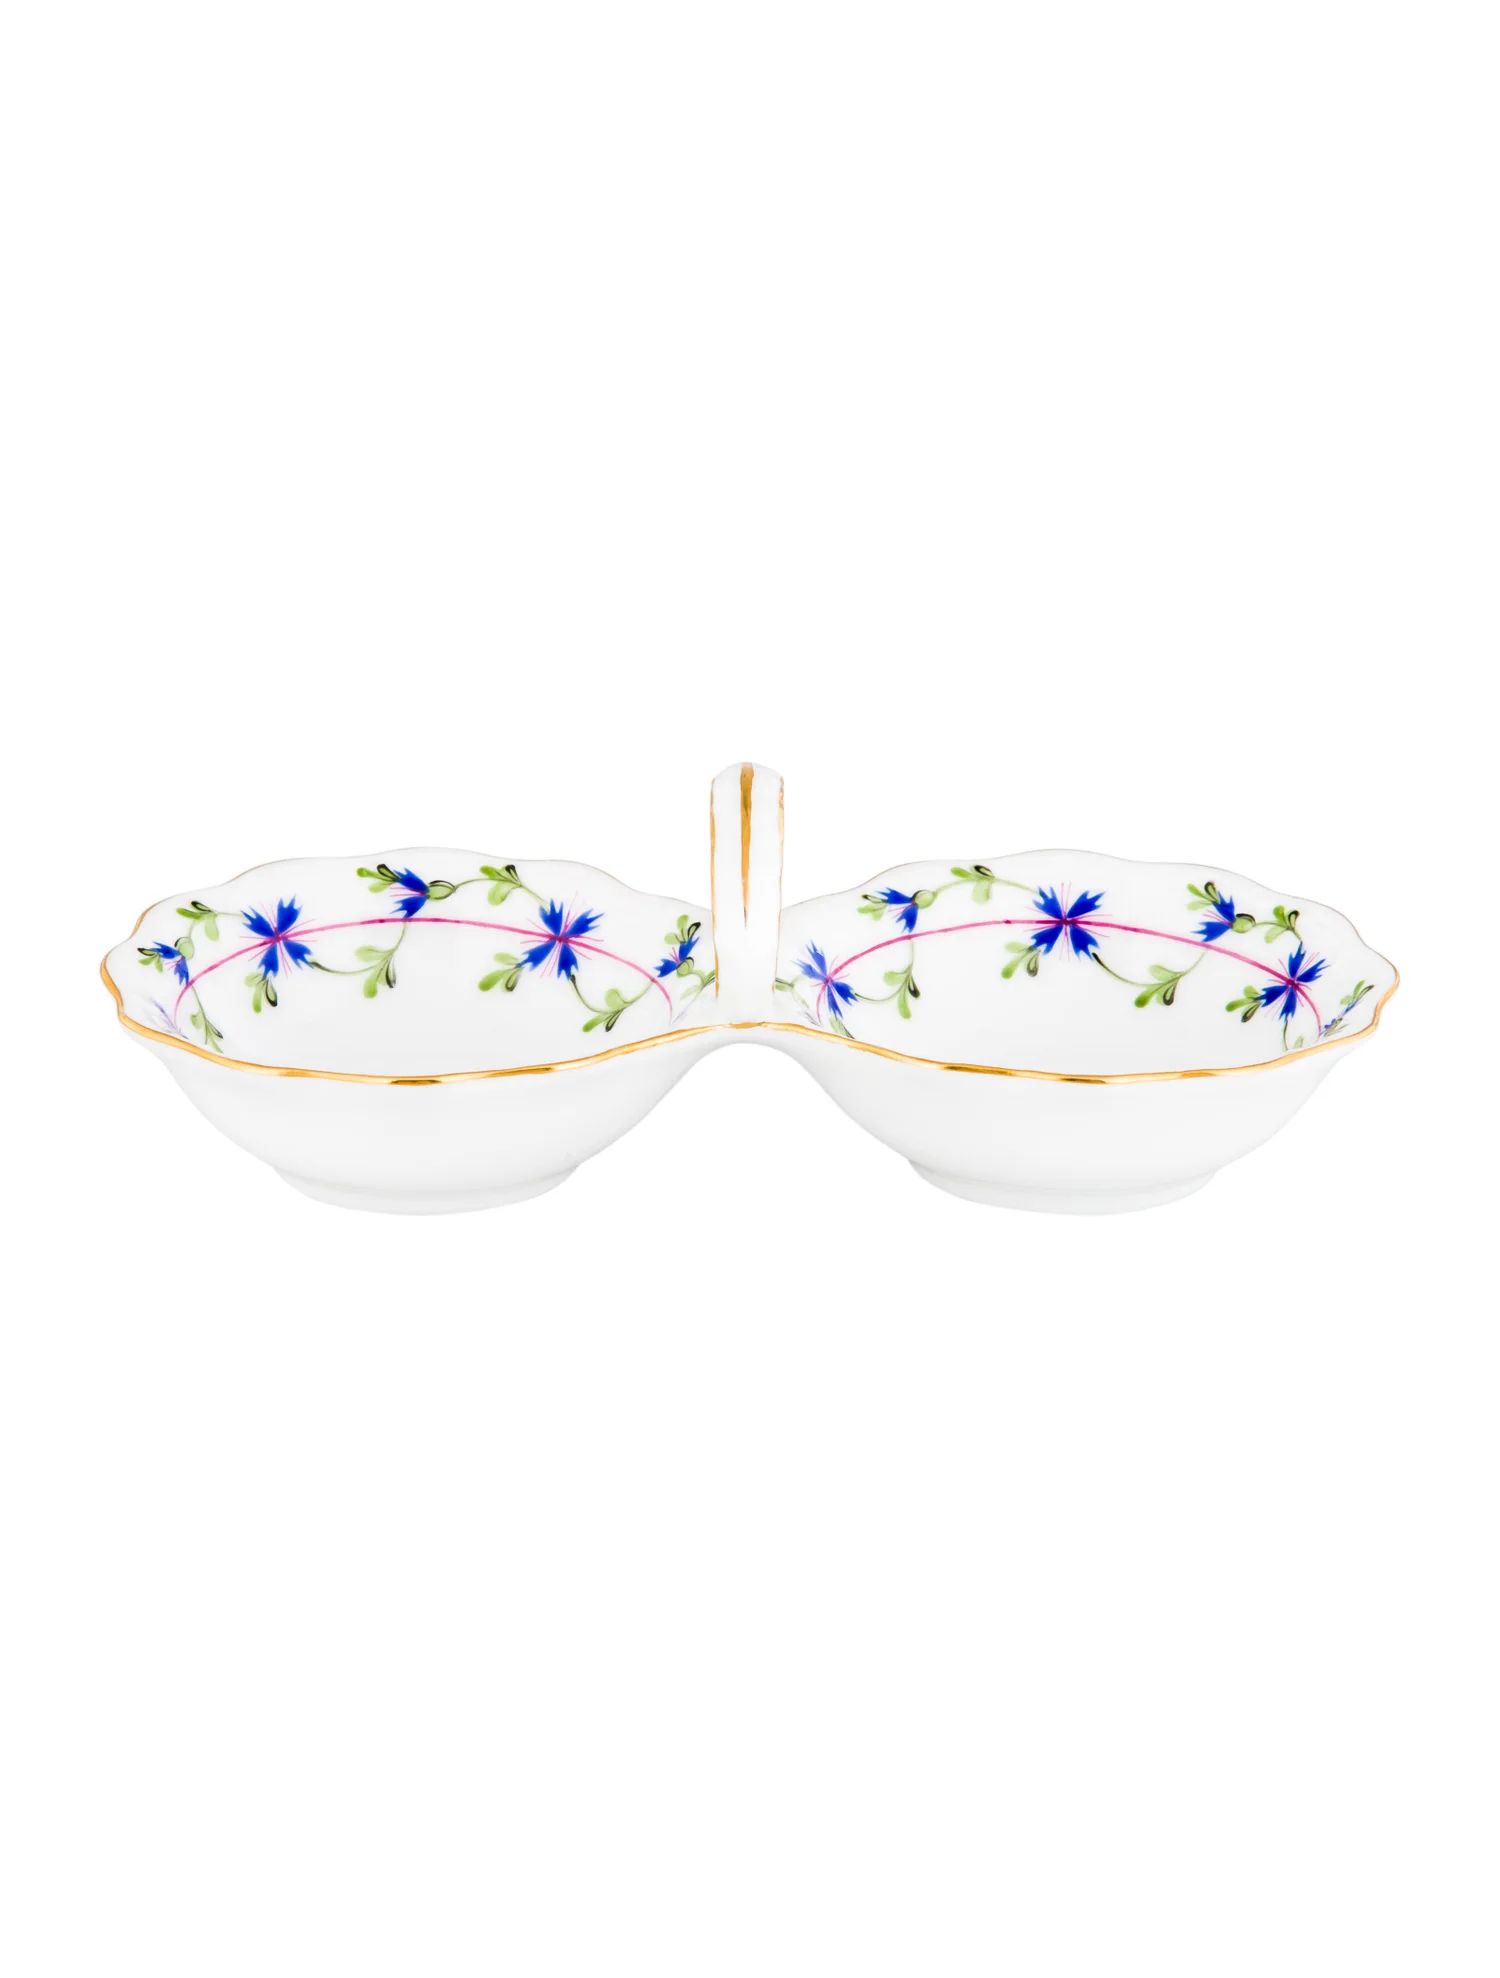 Herend Blue Garland Double Dish - Decor & Accessories -
          HND25294 | The RealReal | The RealReal